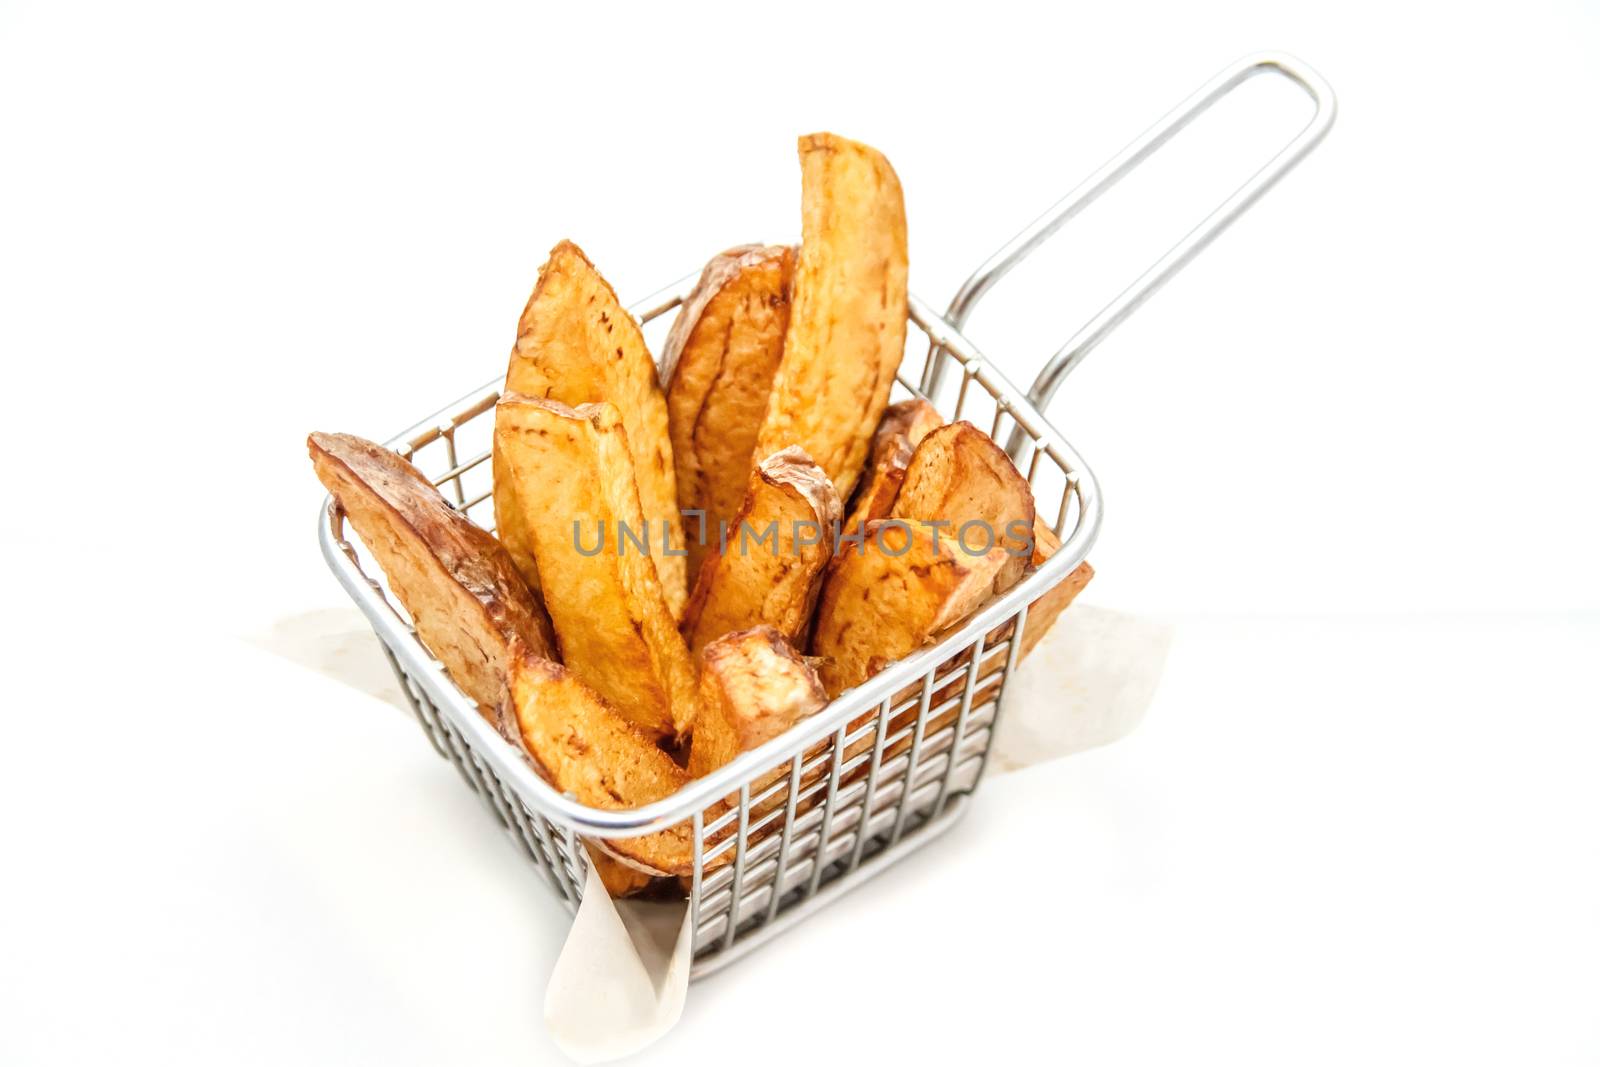 French fries in a metallic stainless steel basket by Angel_a